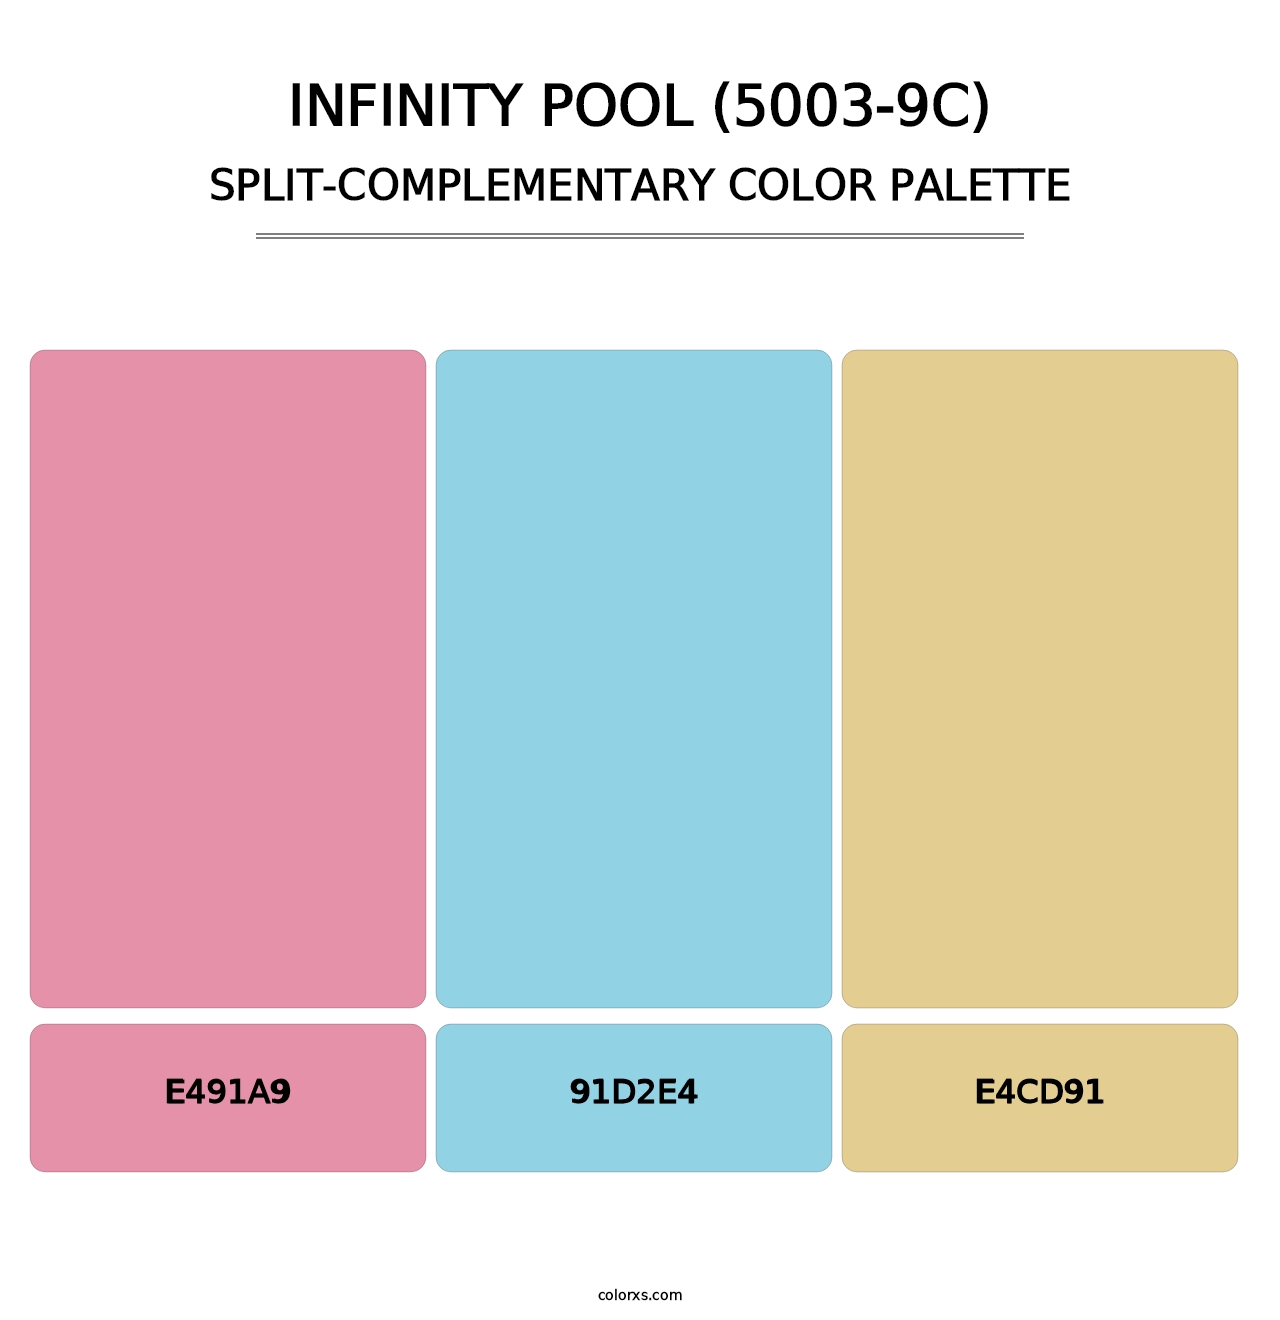 Infinity Pool (5003-9C) - Split-Complementary Color Palette